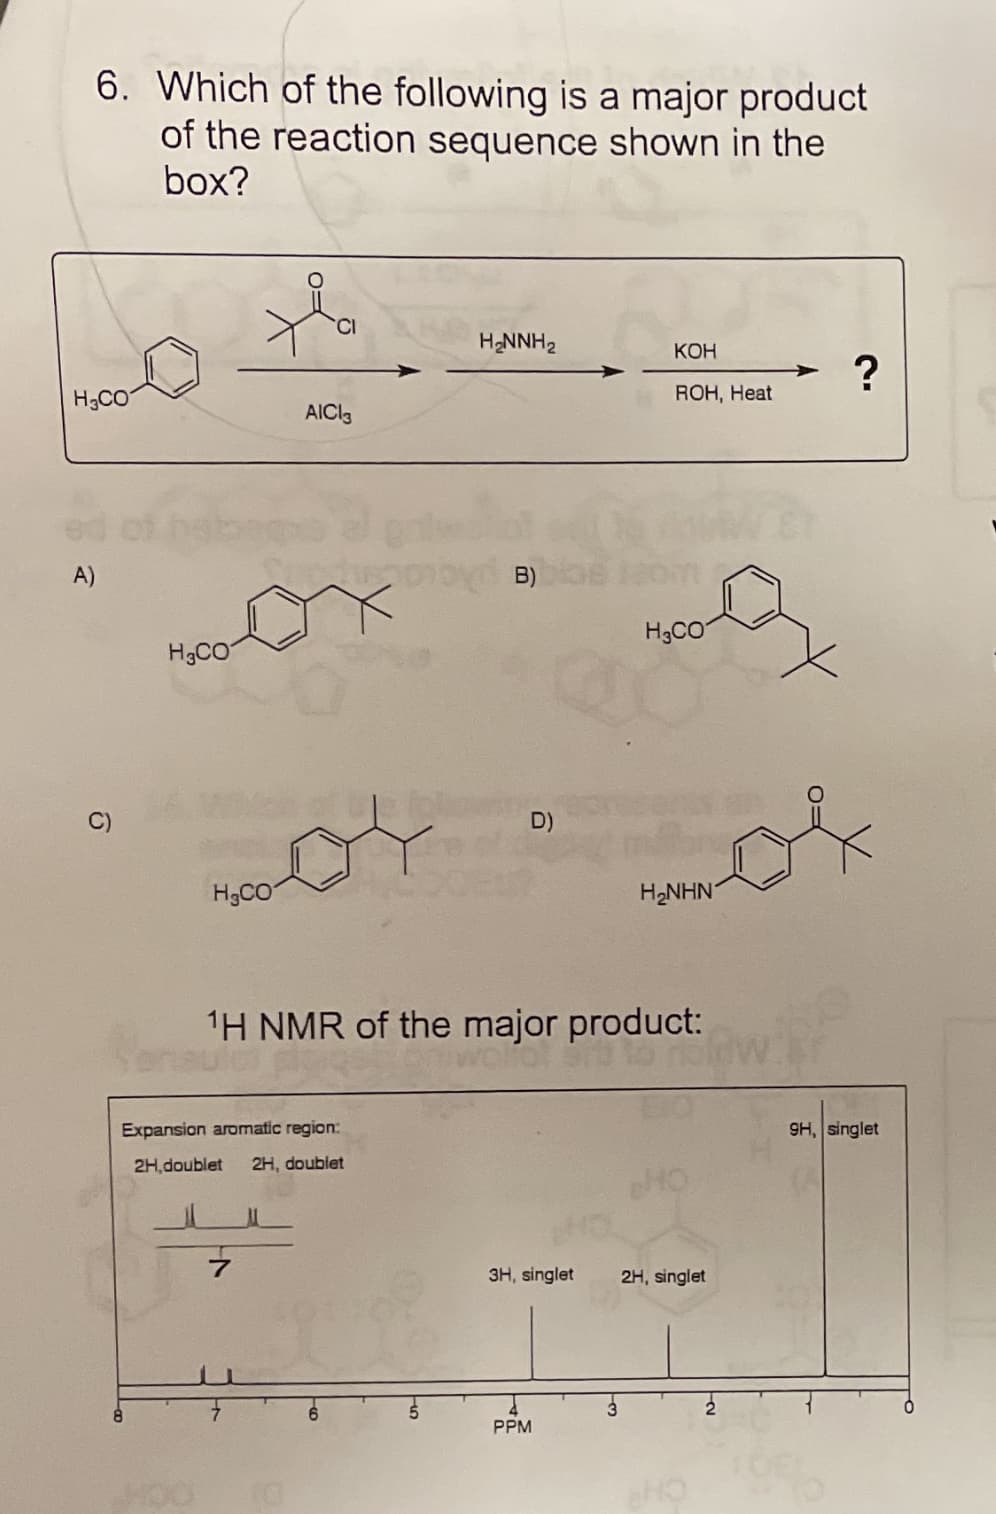 6. Which of the following is a major product
of the reaction sequence shown in the
box?
H2NNH2
КОН
of
H3CO
ROH, Heat
AICI3
A)
H3CO
H3CO
D)
H3CO
H2NHN
1H NMR of the major product:
Expansion aromatic region:
9H, singlet
2H,doublet
2H, doublet
CH
3H, singlet
2H, singlet
PPM
